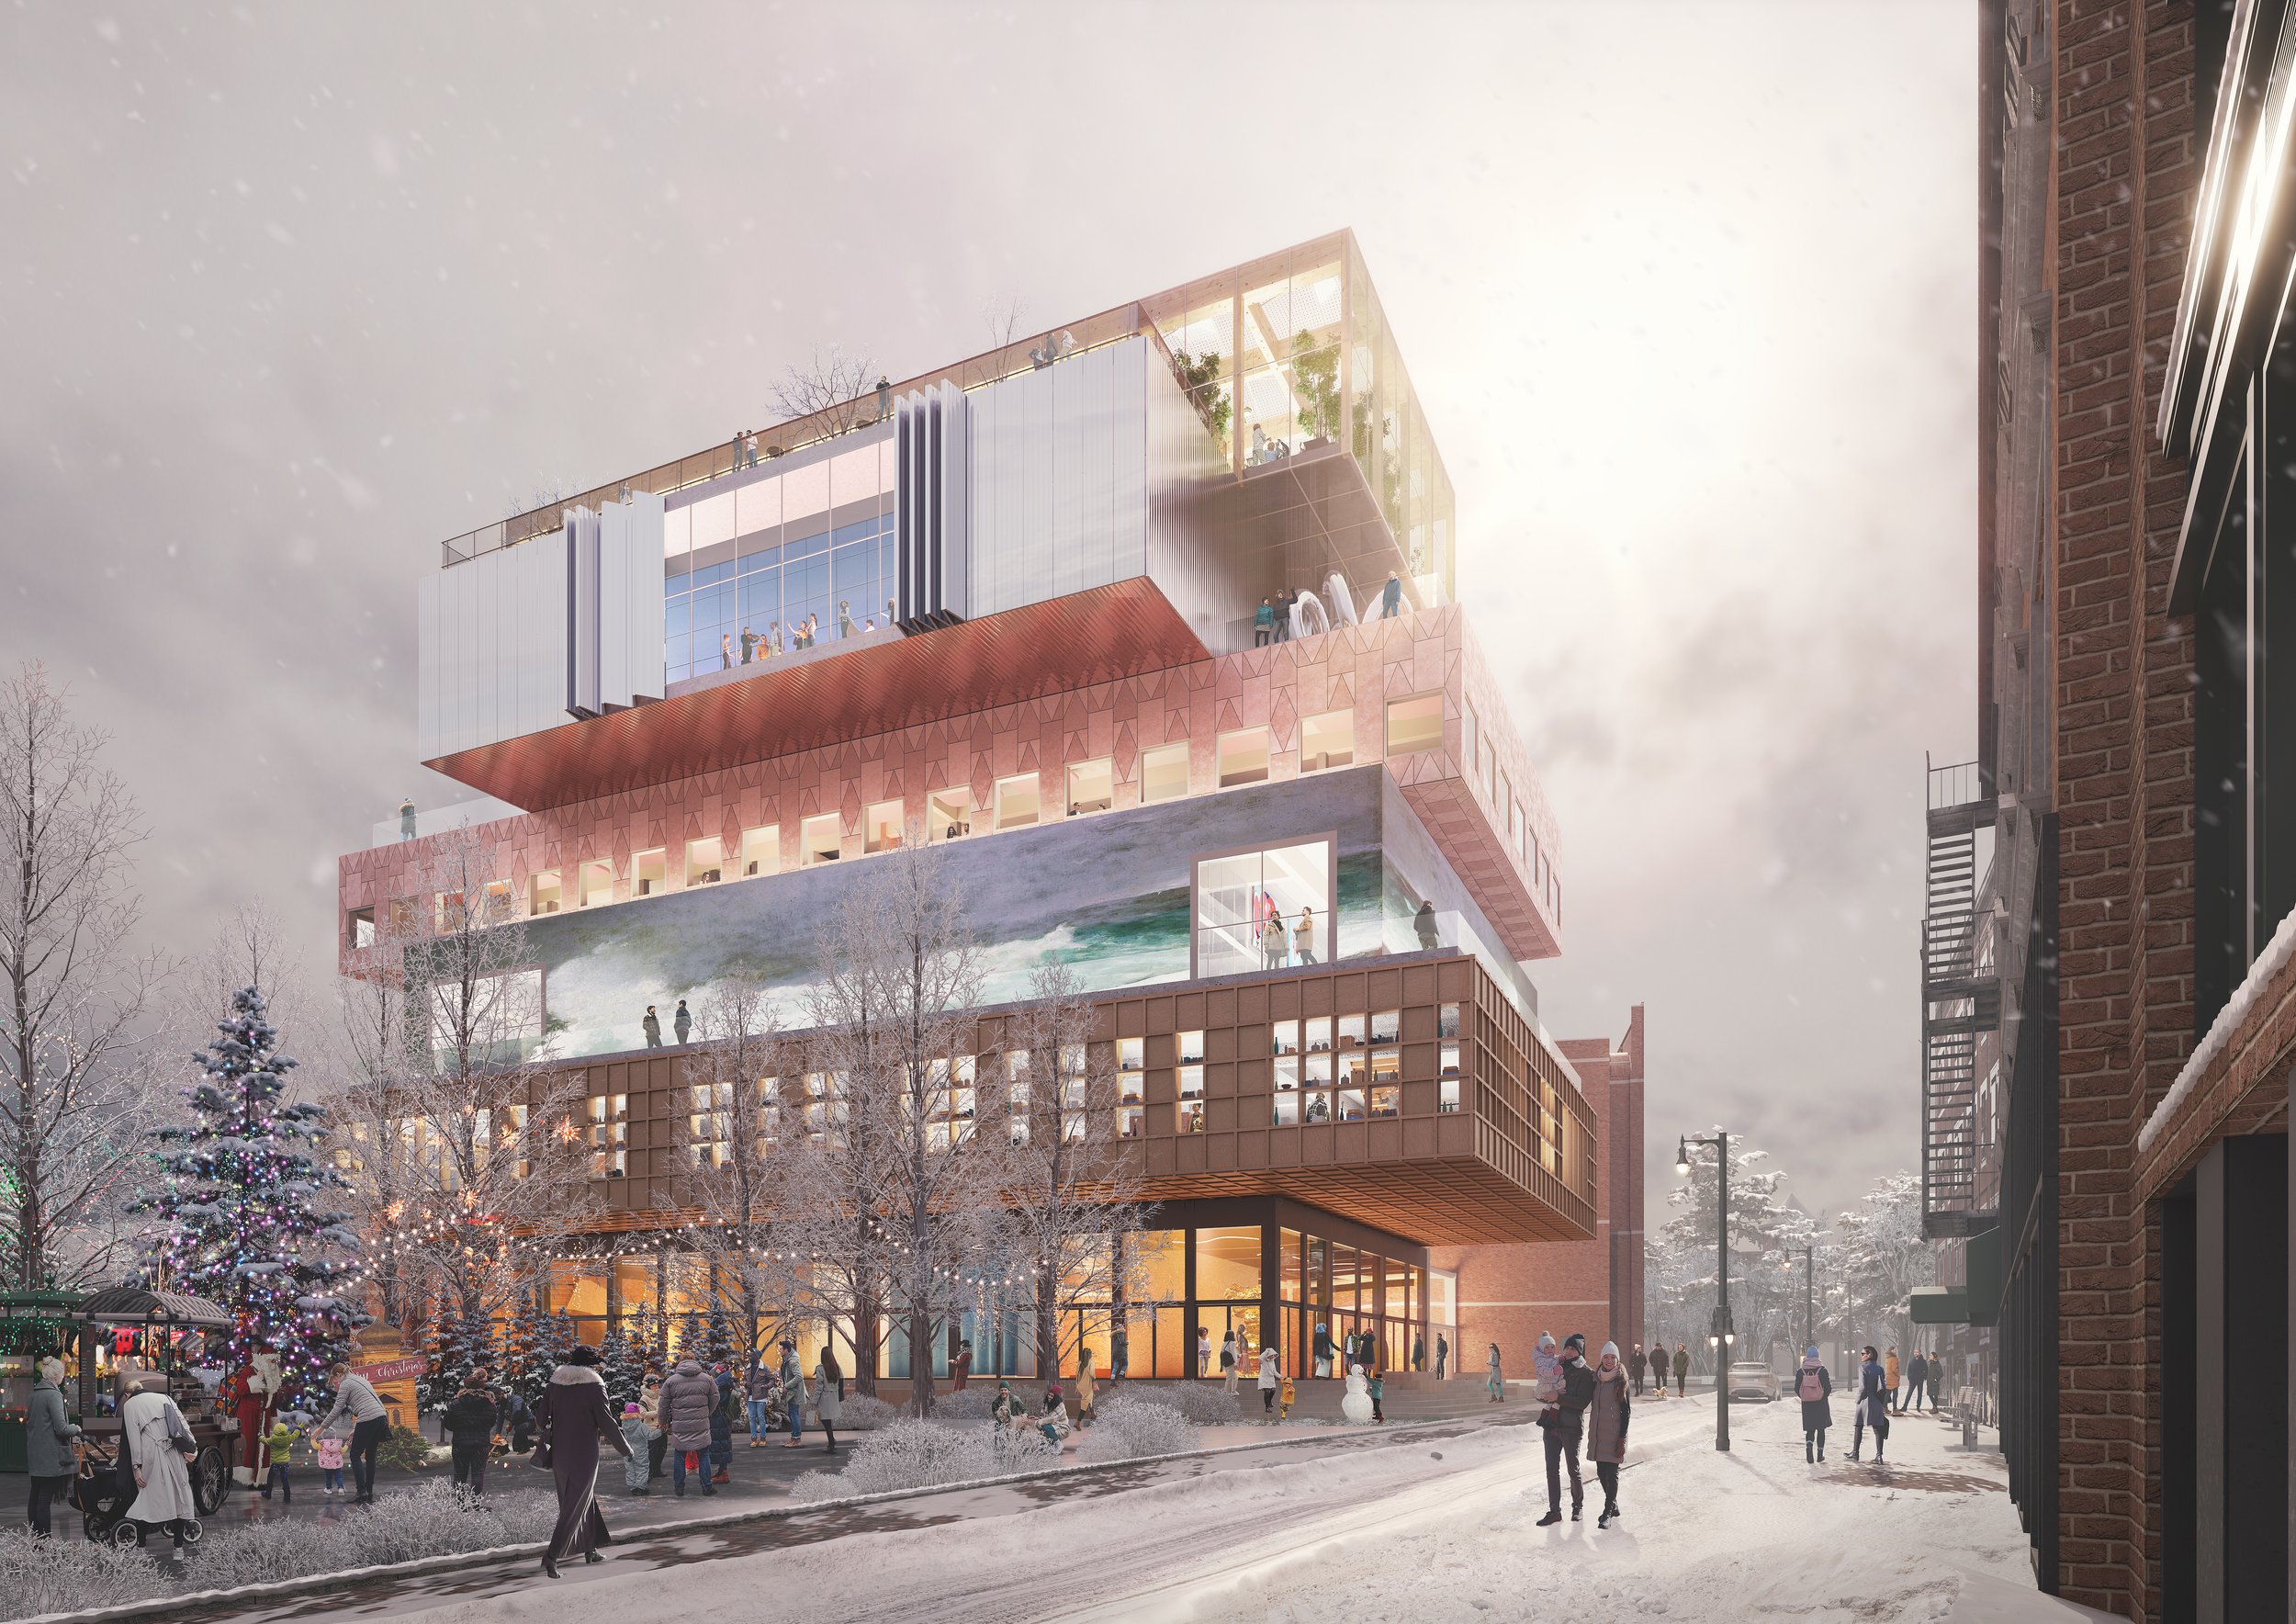  The New Wing seen from Free St., in the Winter. Image courtesy of Portland Museum of Art, Maine / MVRDV / Dovetail Design Strategists 